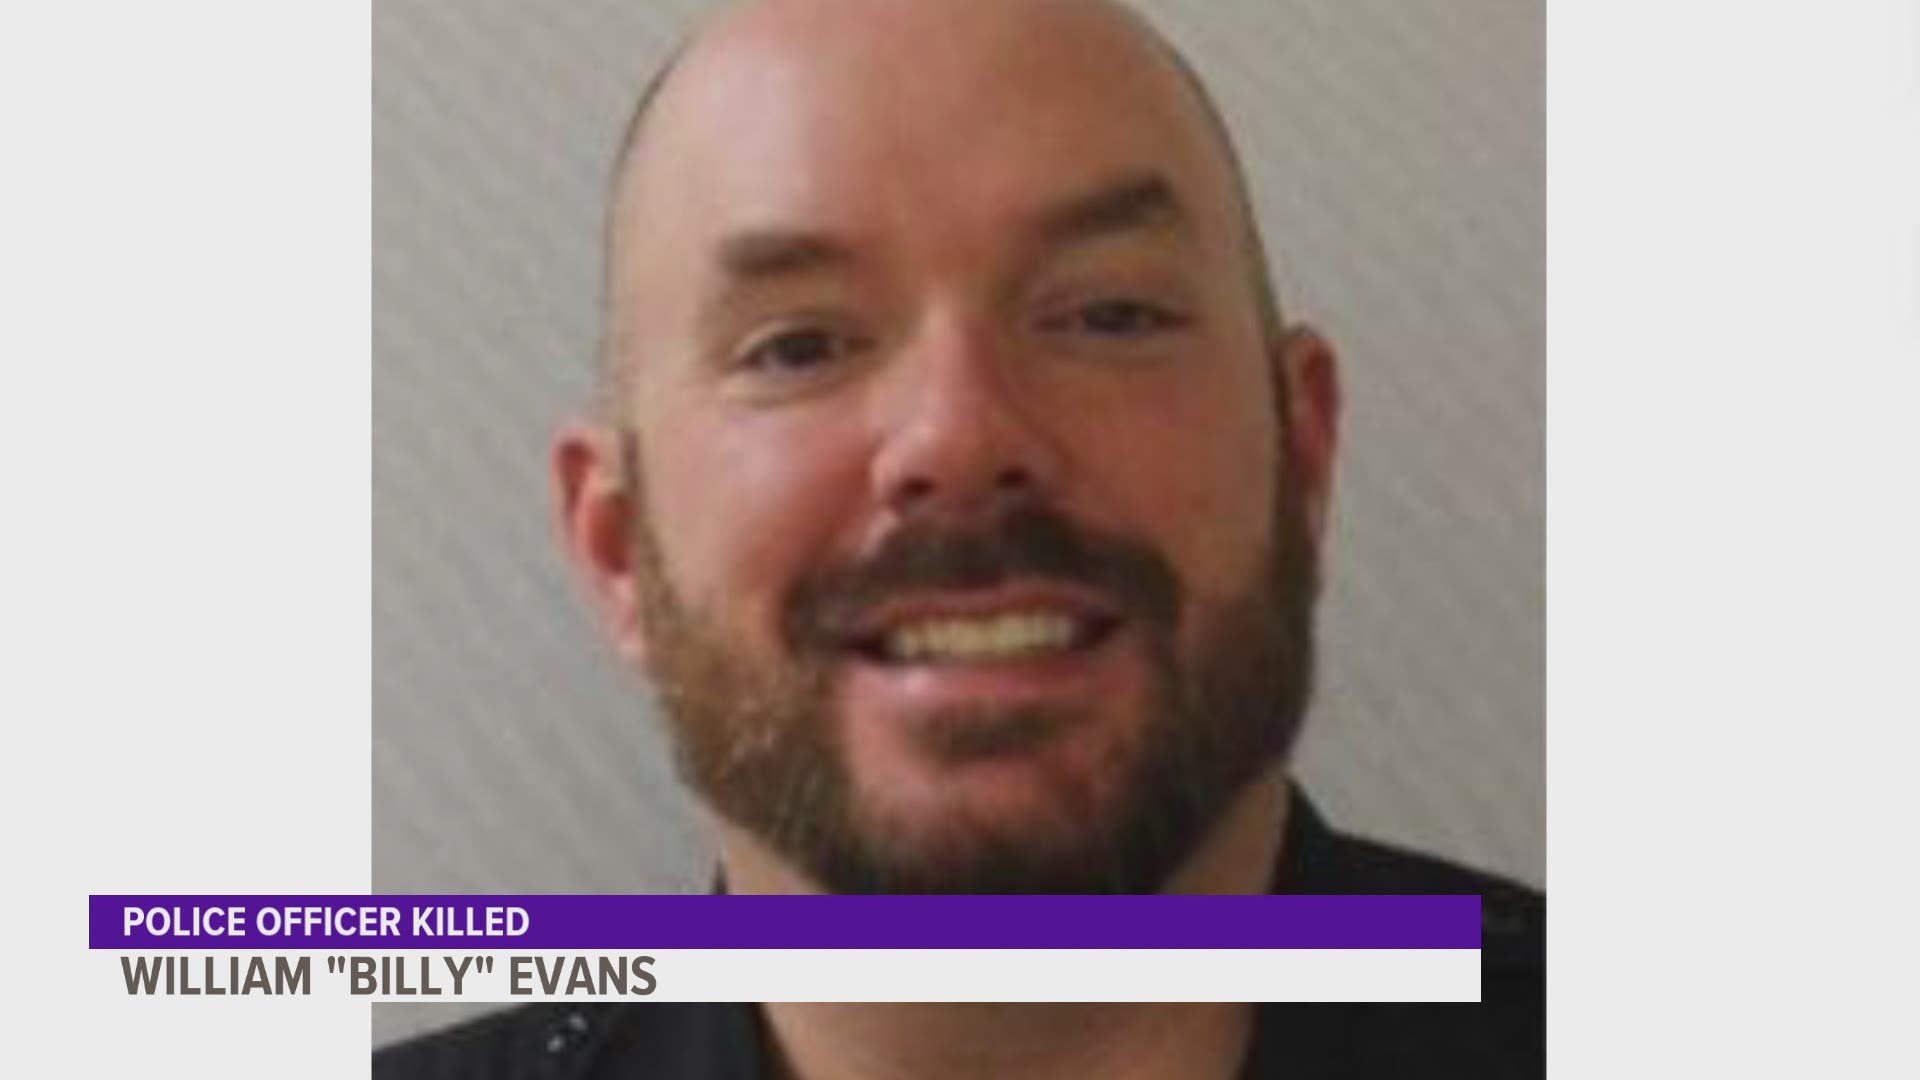 U.S. Capitol Police identified the slain officer as William “Billy” Evans, an 18-year veteran who was a member of the department’s first responders unit.